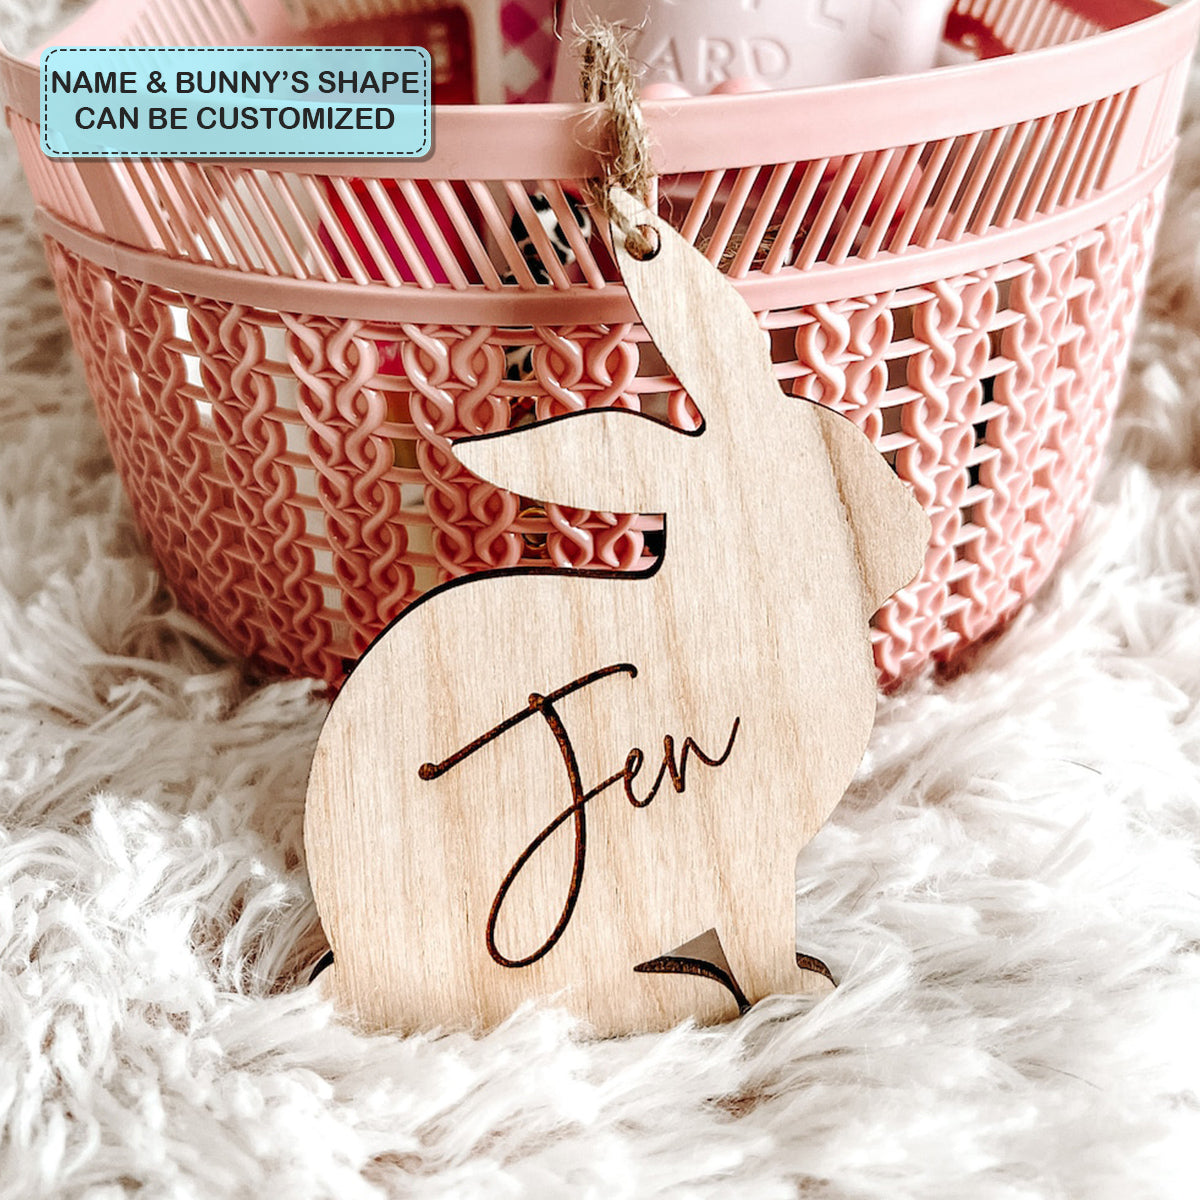 Cute Bunny Tag - Personalized Custom Basket Tag - Easter Gift For Family Members, Grandma, Mom